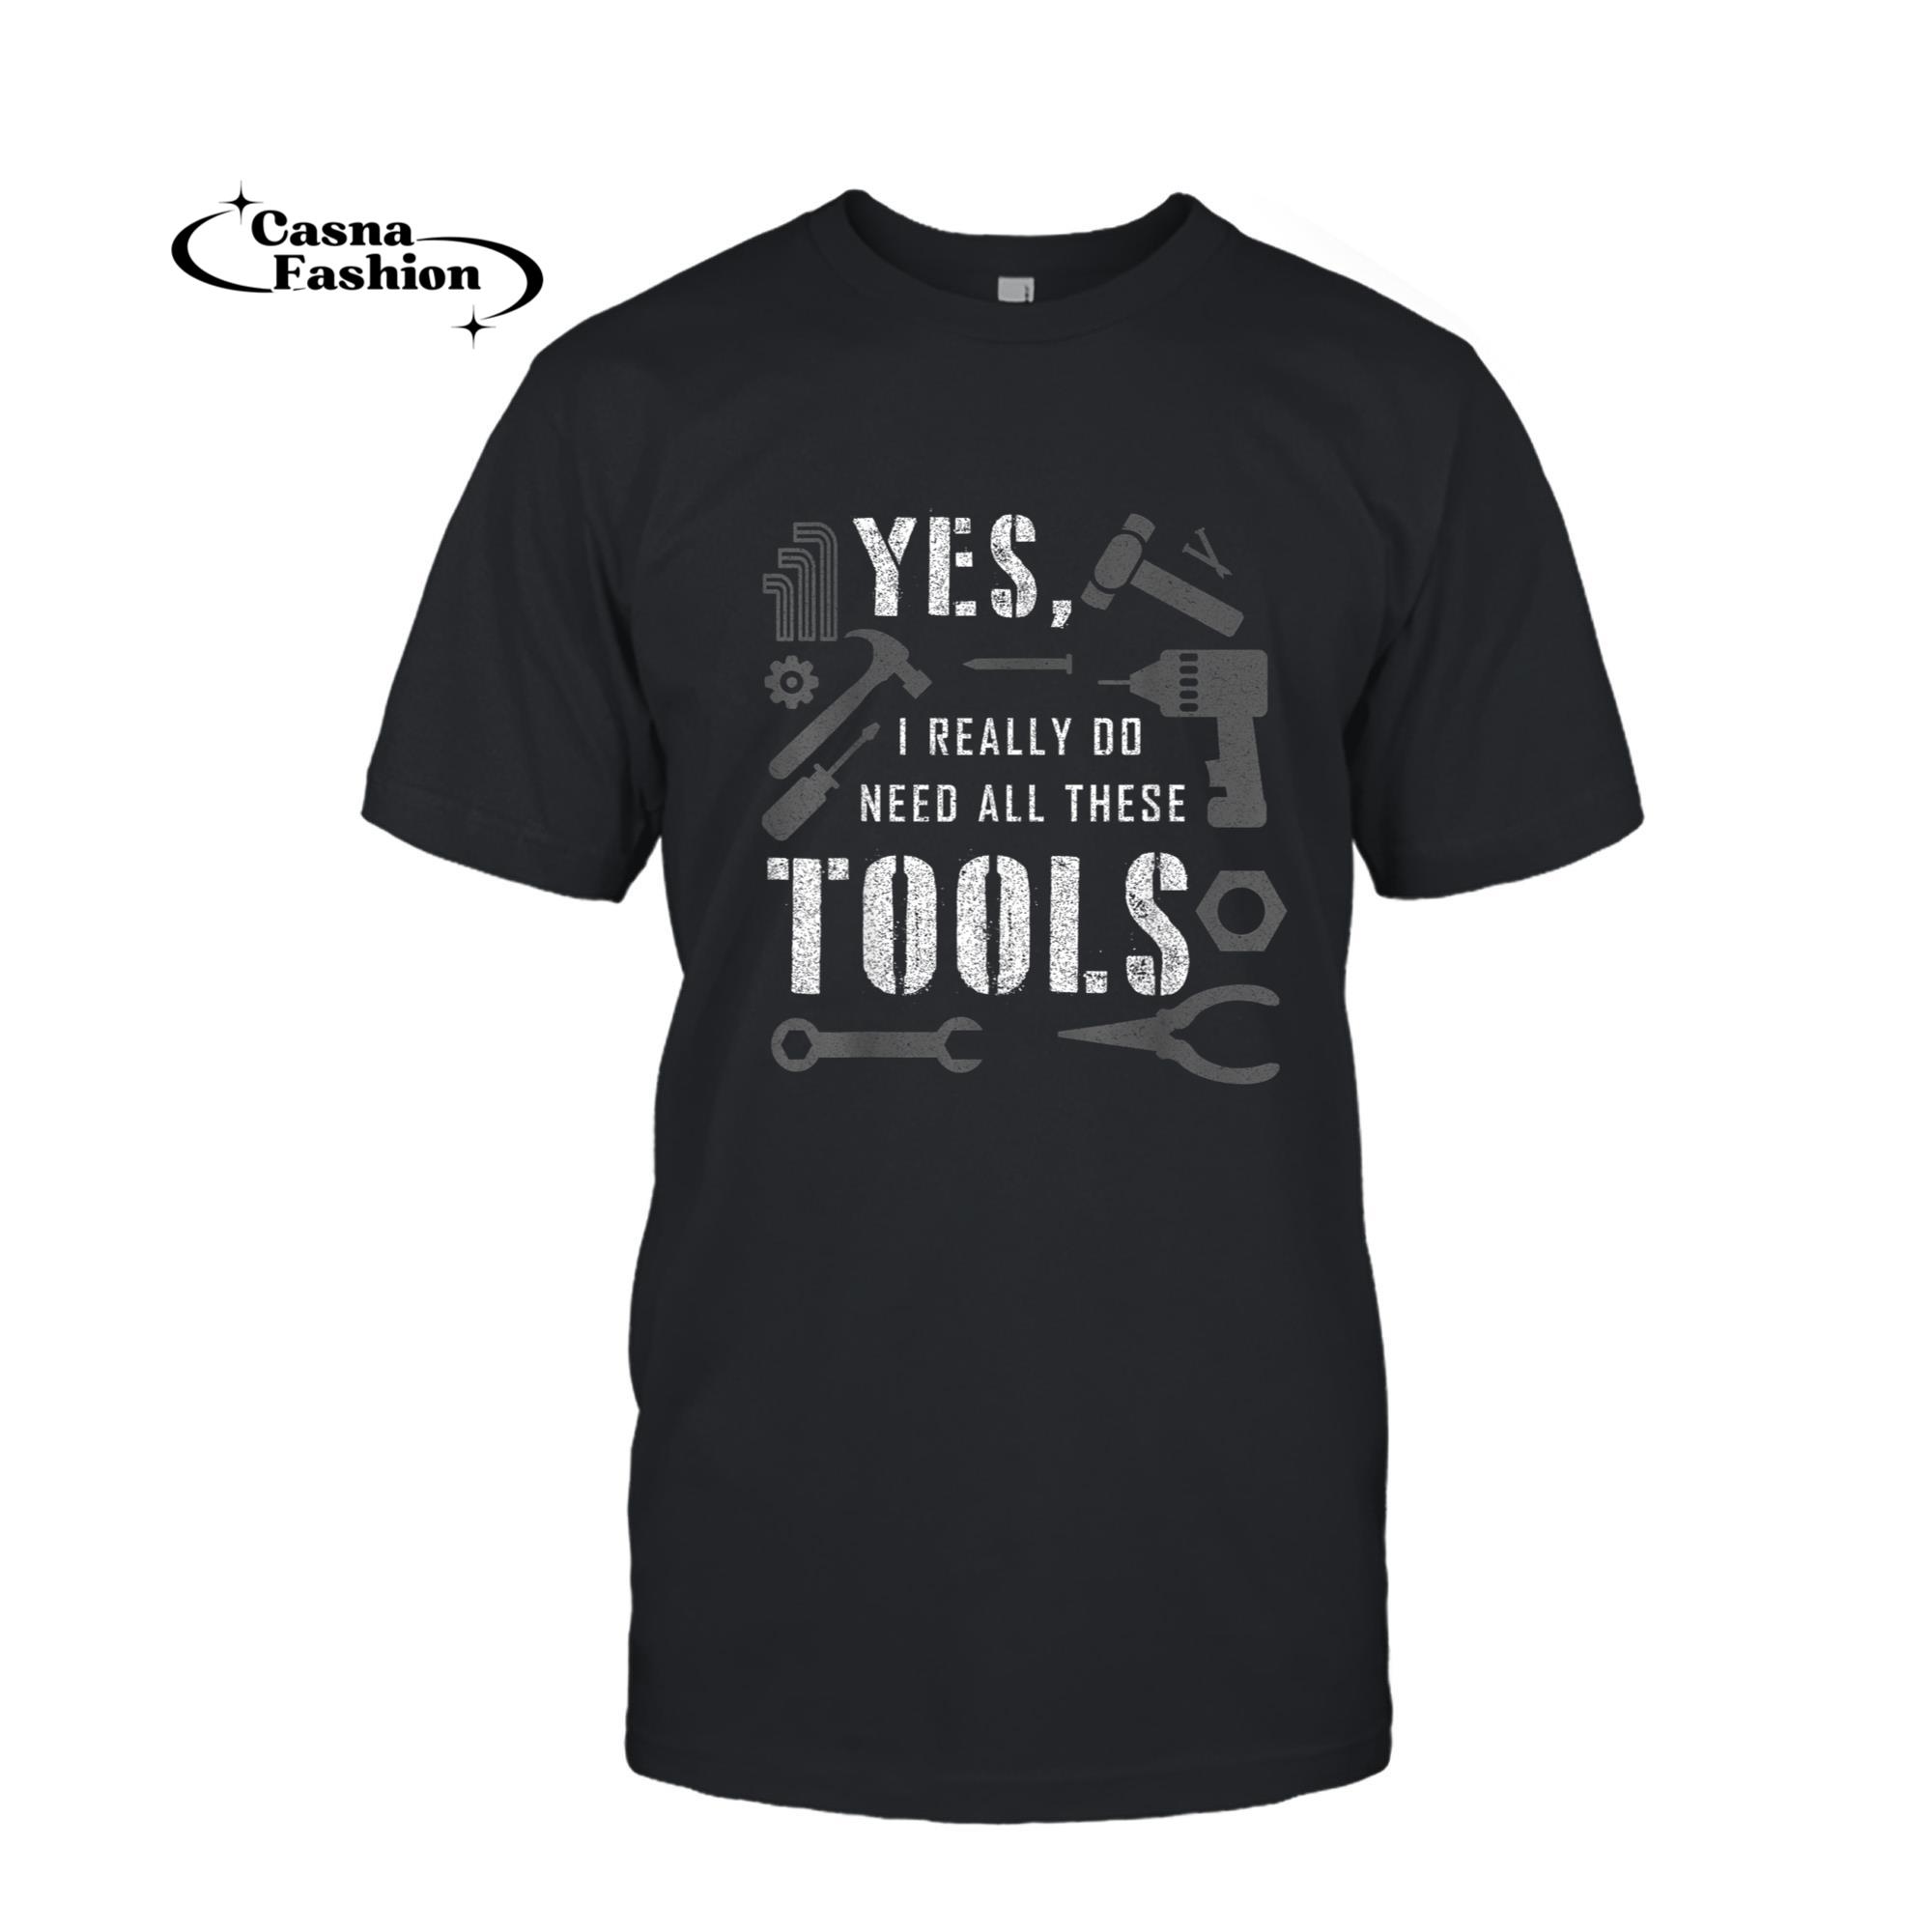 casnafashion_T-shirt_Yes I Really Do Need All These Tools Funny Carpenter T-Shirt_T-shirt_Black